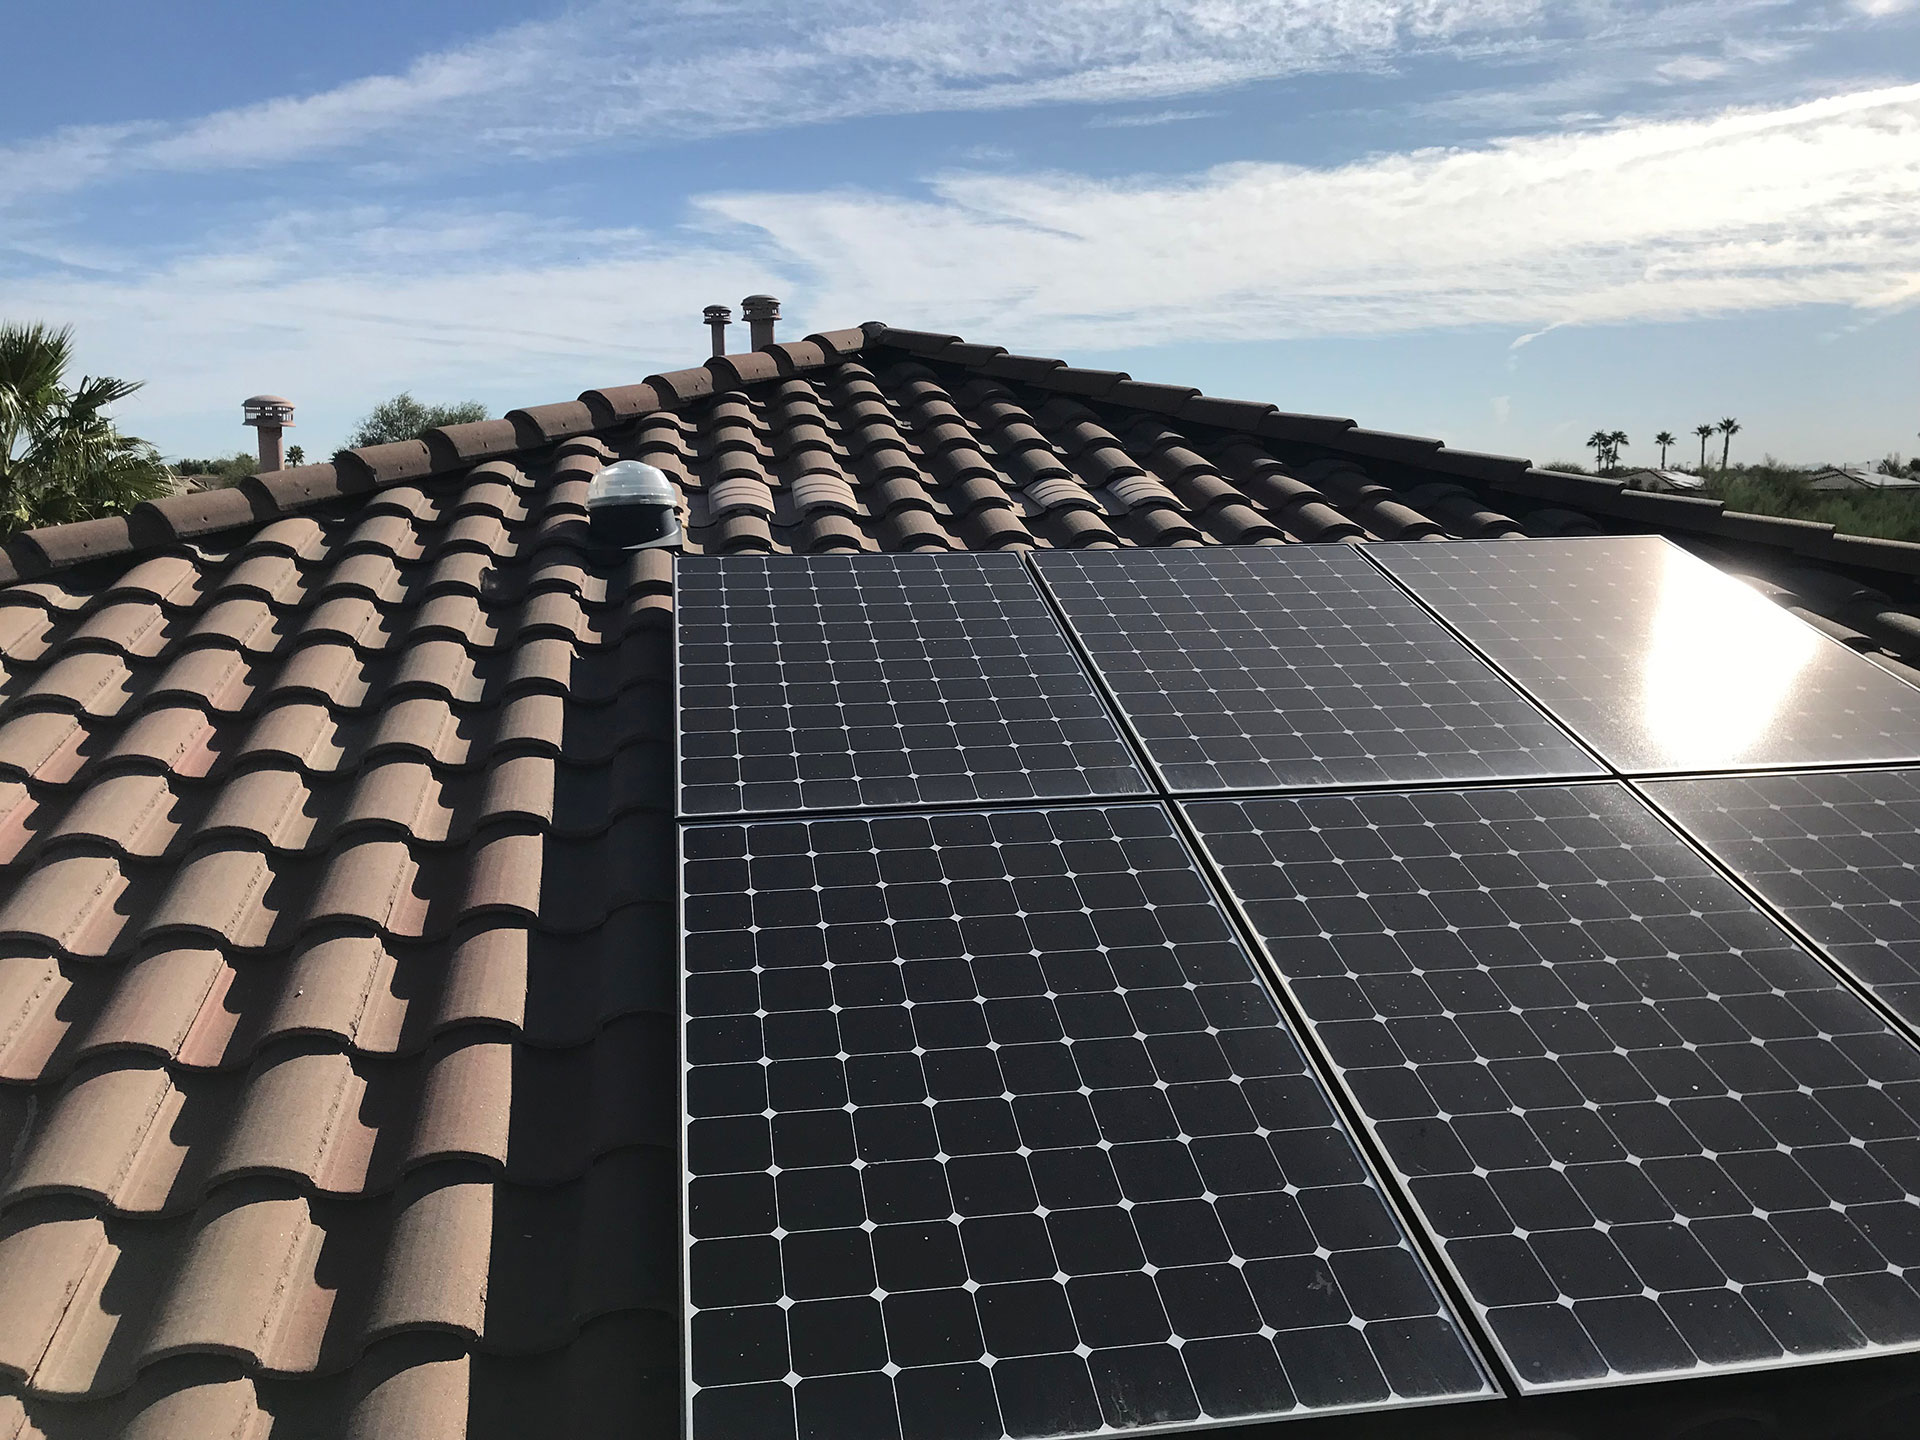 4 Reasons Why Quality Roofing is Important for Solar